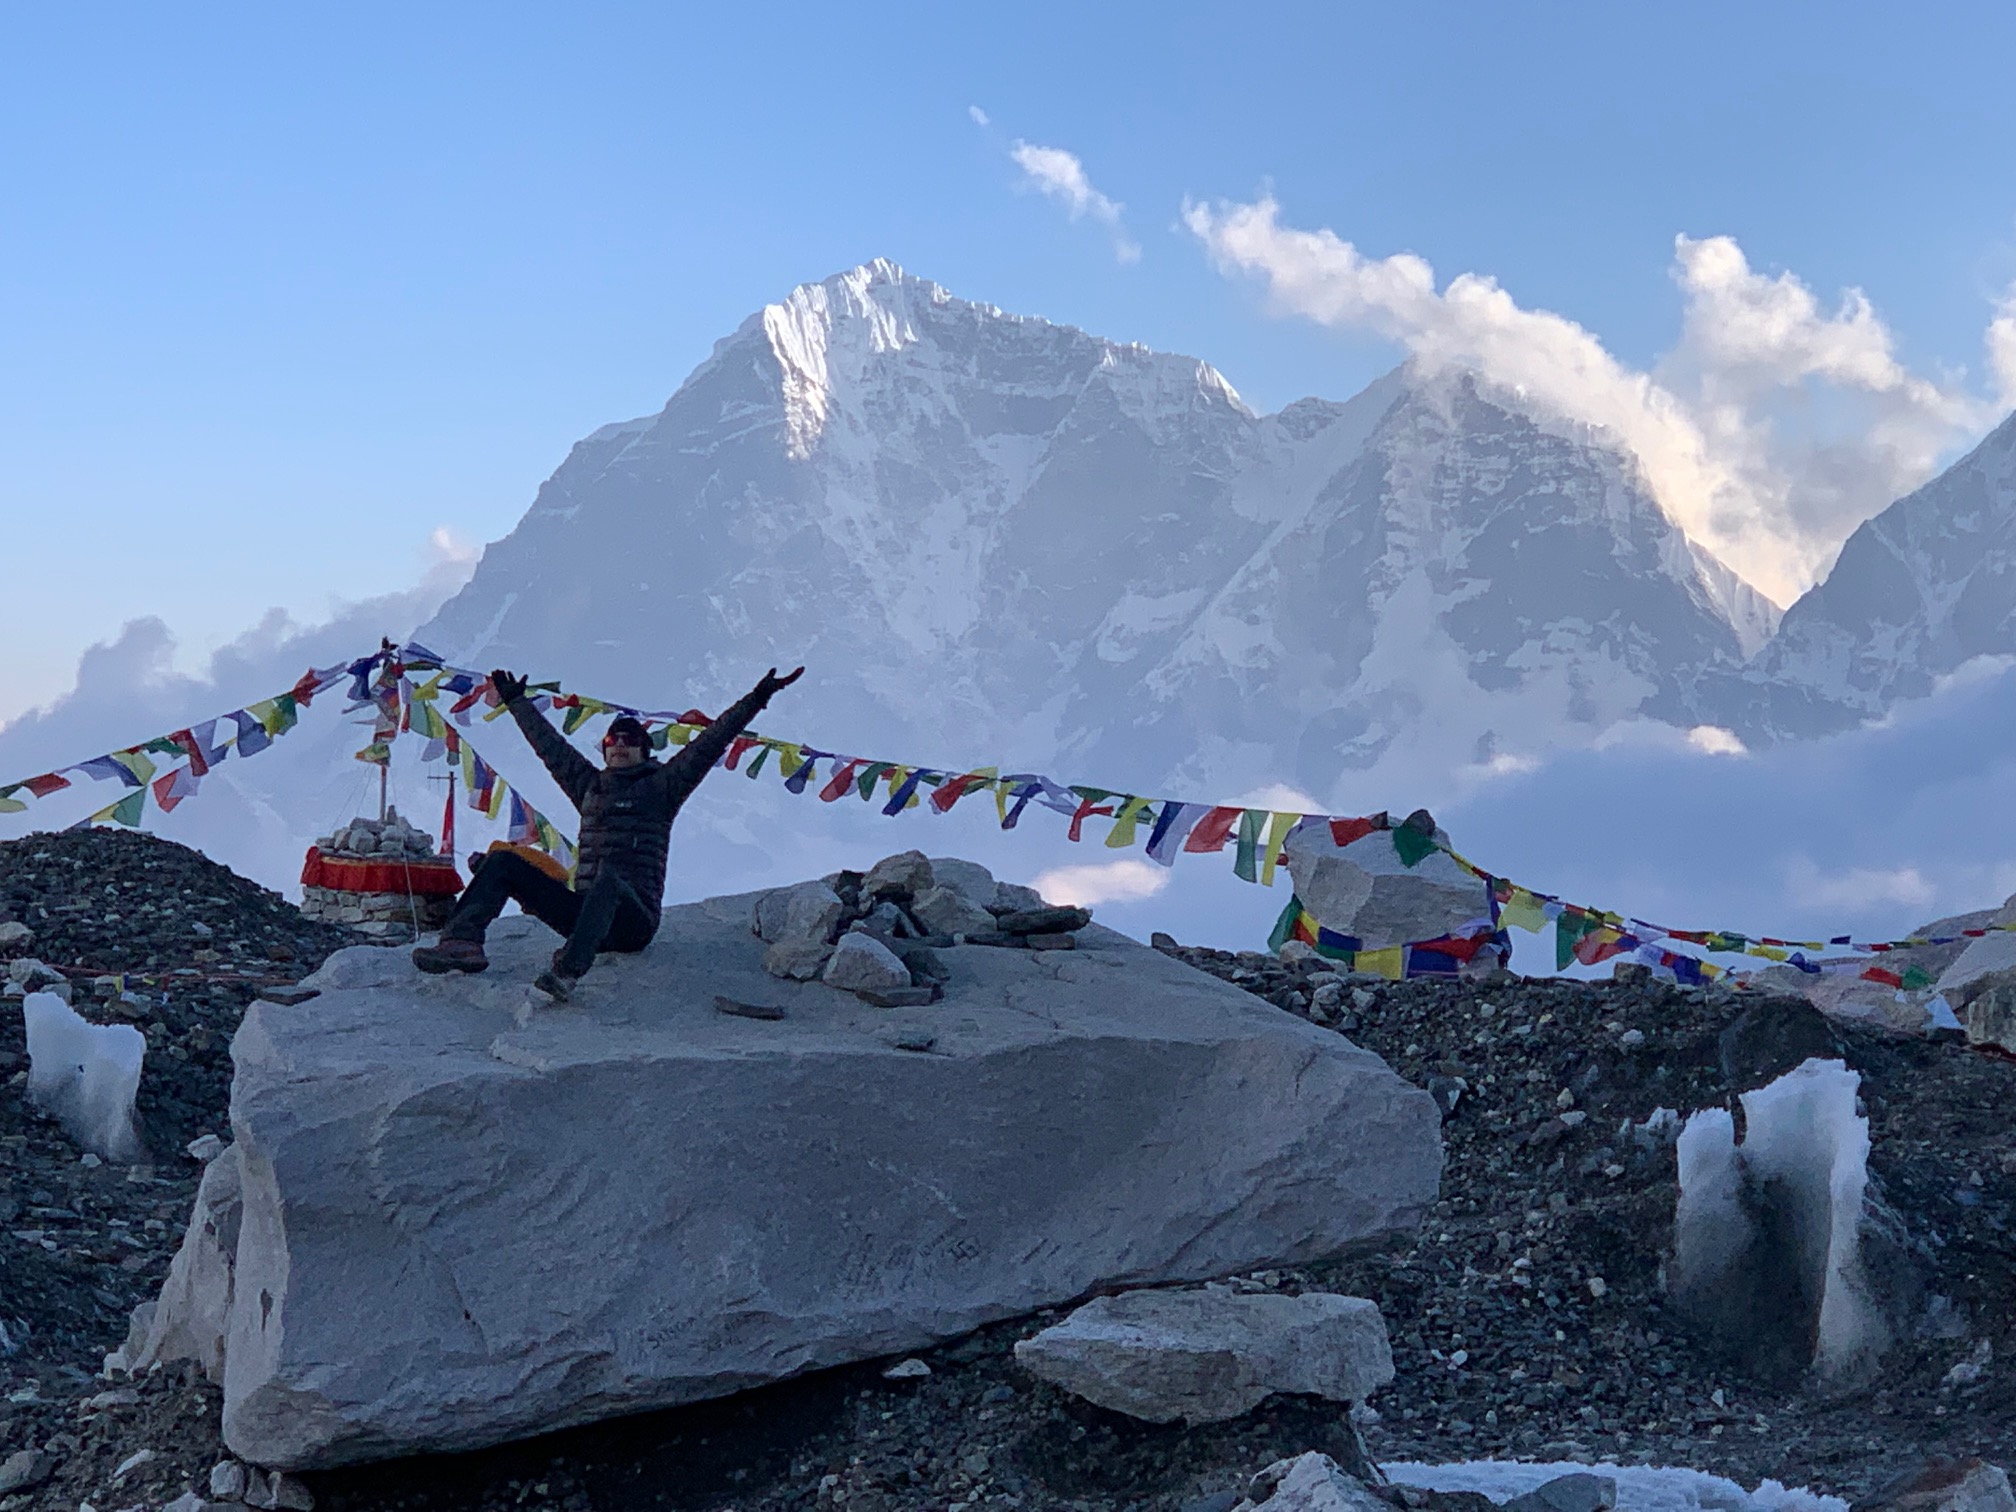 The First Company to Offer Sleeping at Everest Base Camp Treks